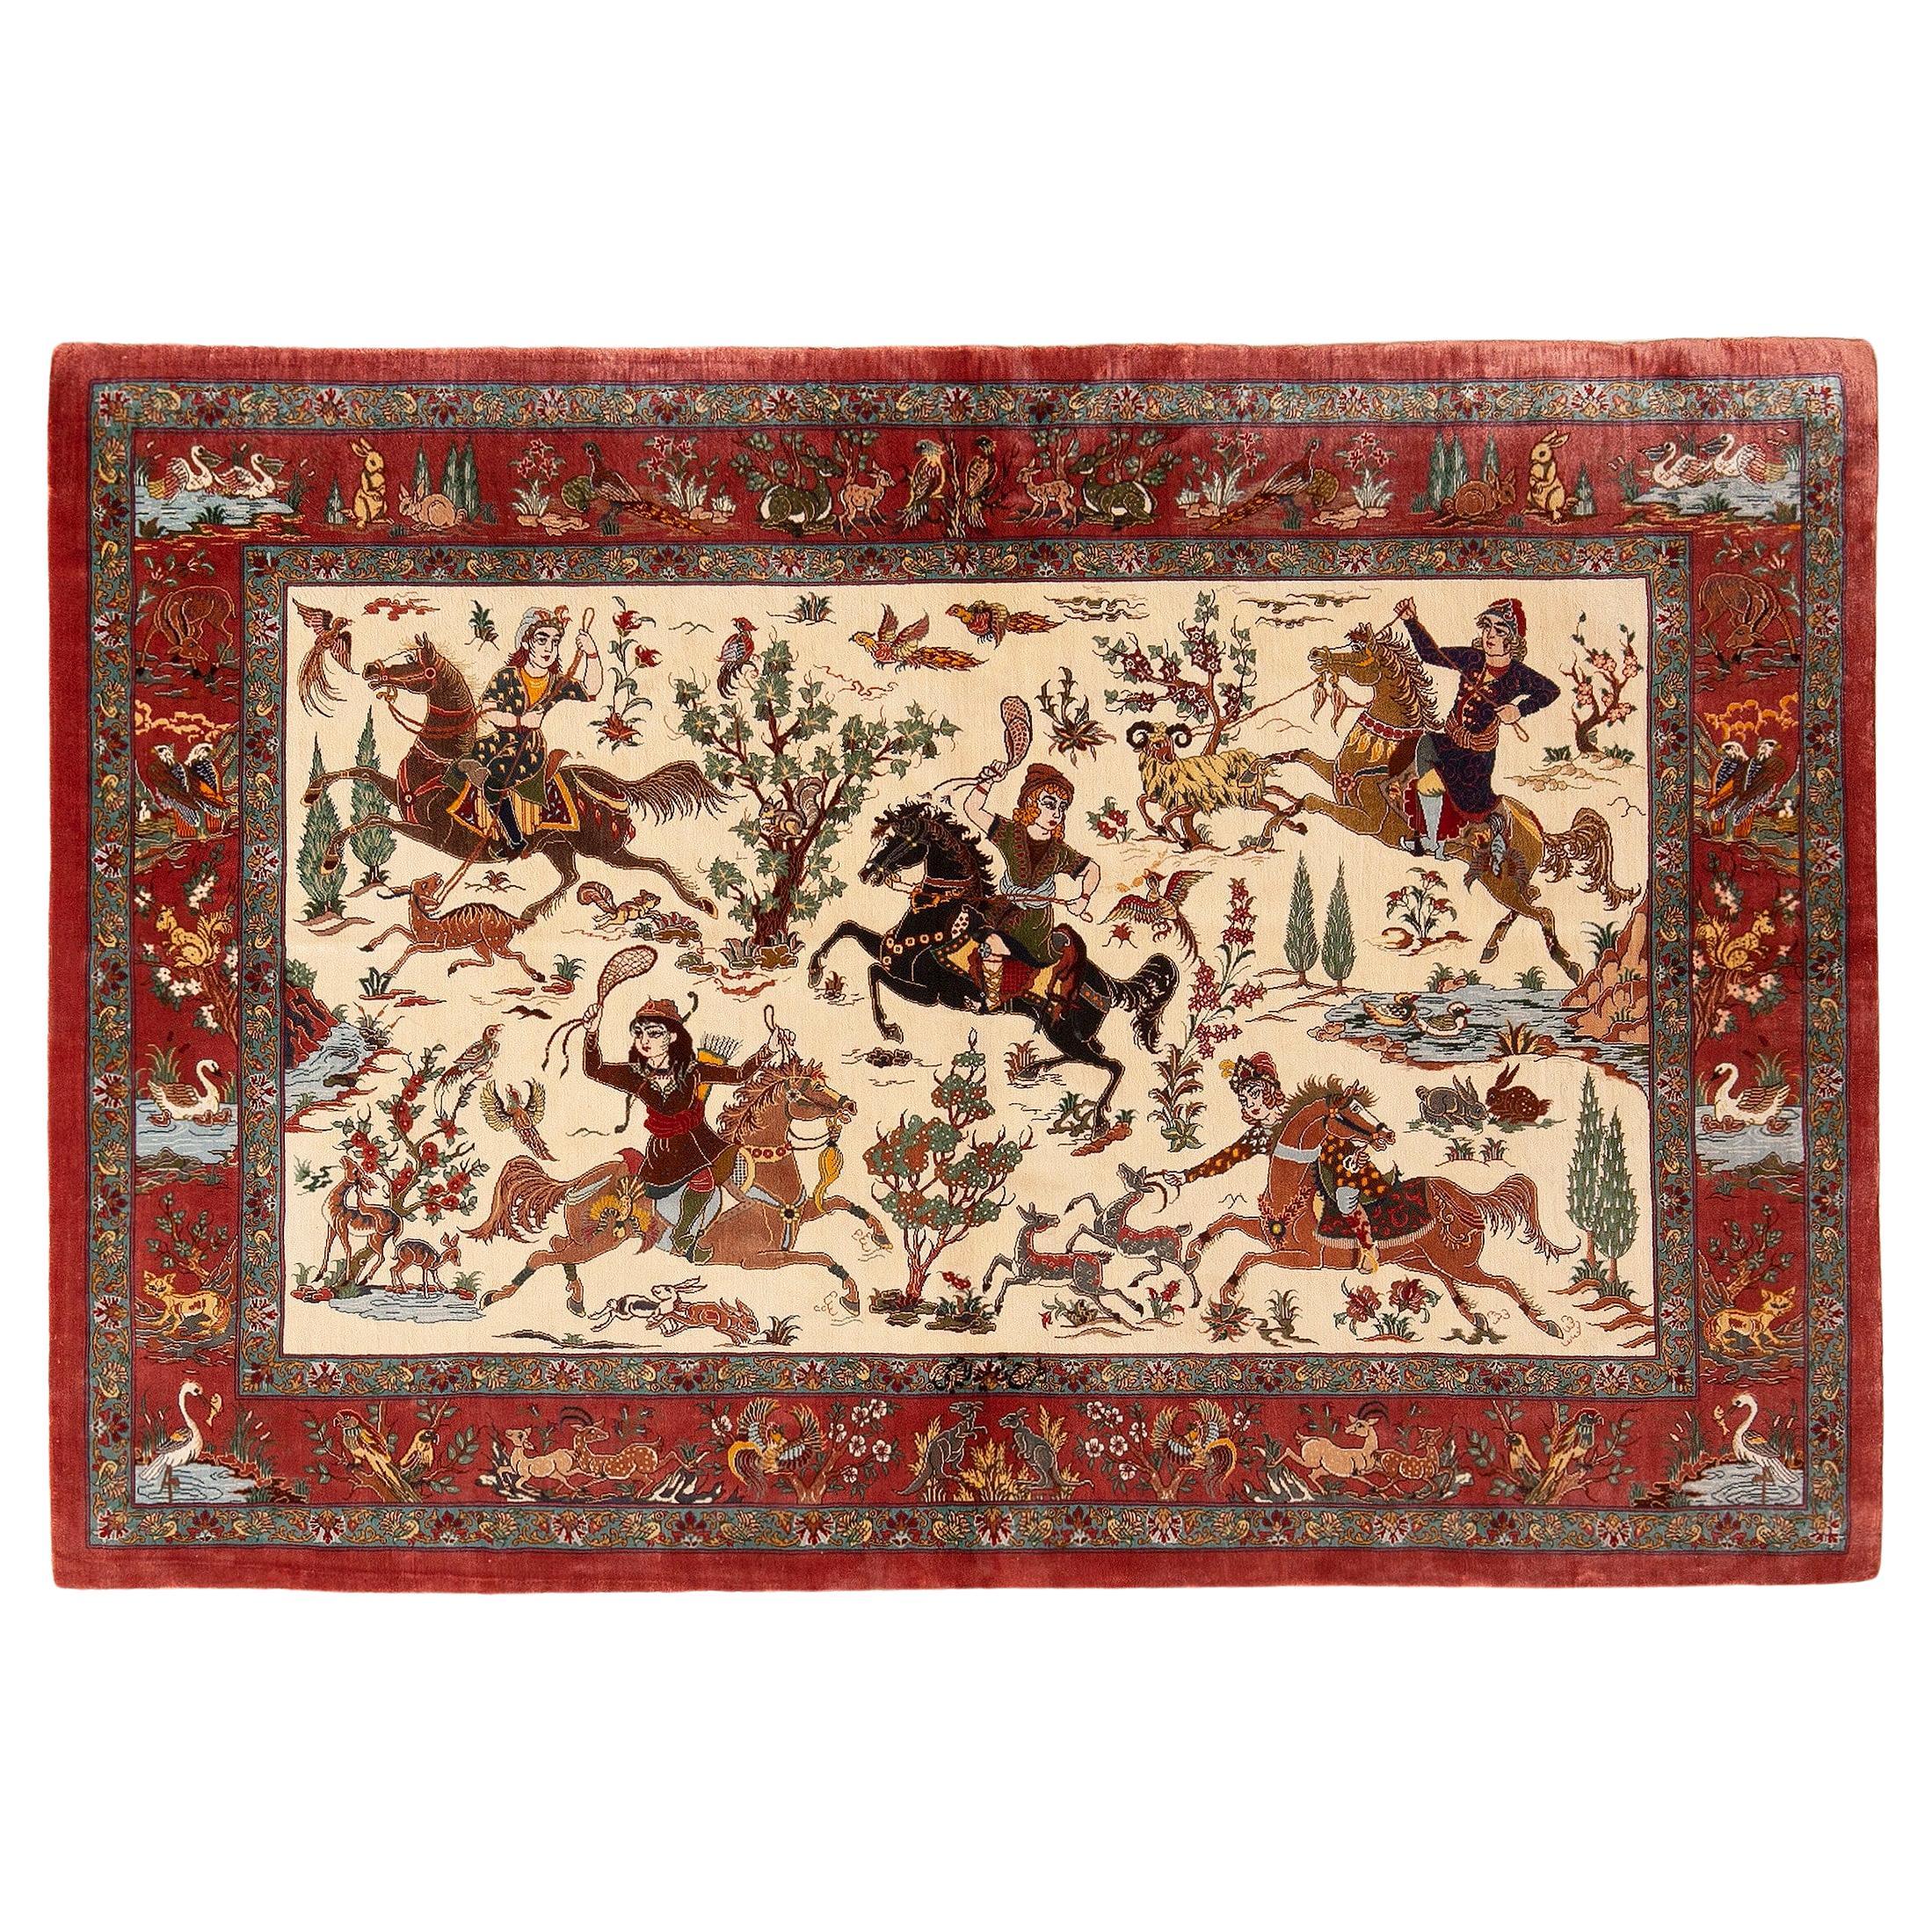 Artistic Hunting Design Vintage Persian Silk Qum Small Luxury Rug 3'4" x 5' For Sale